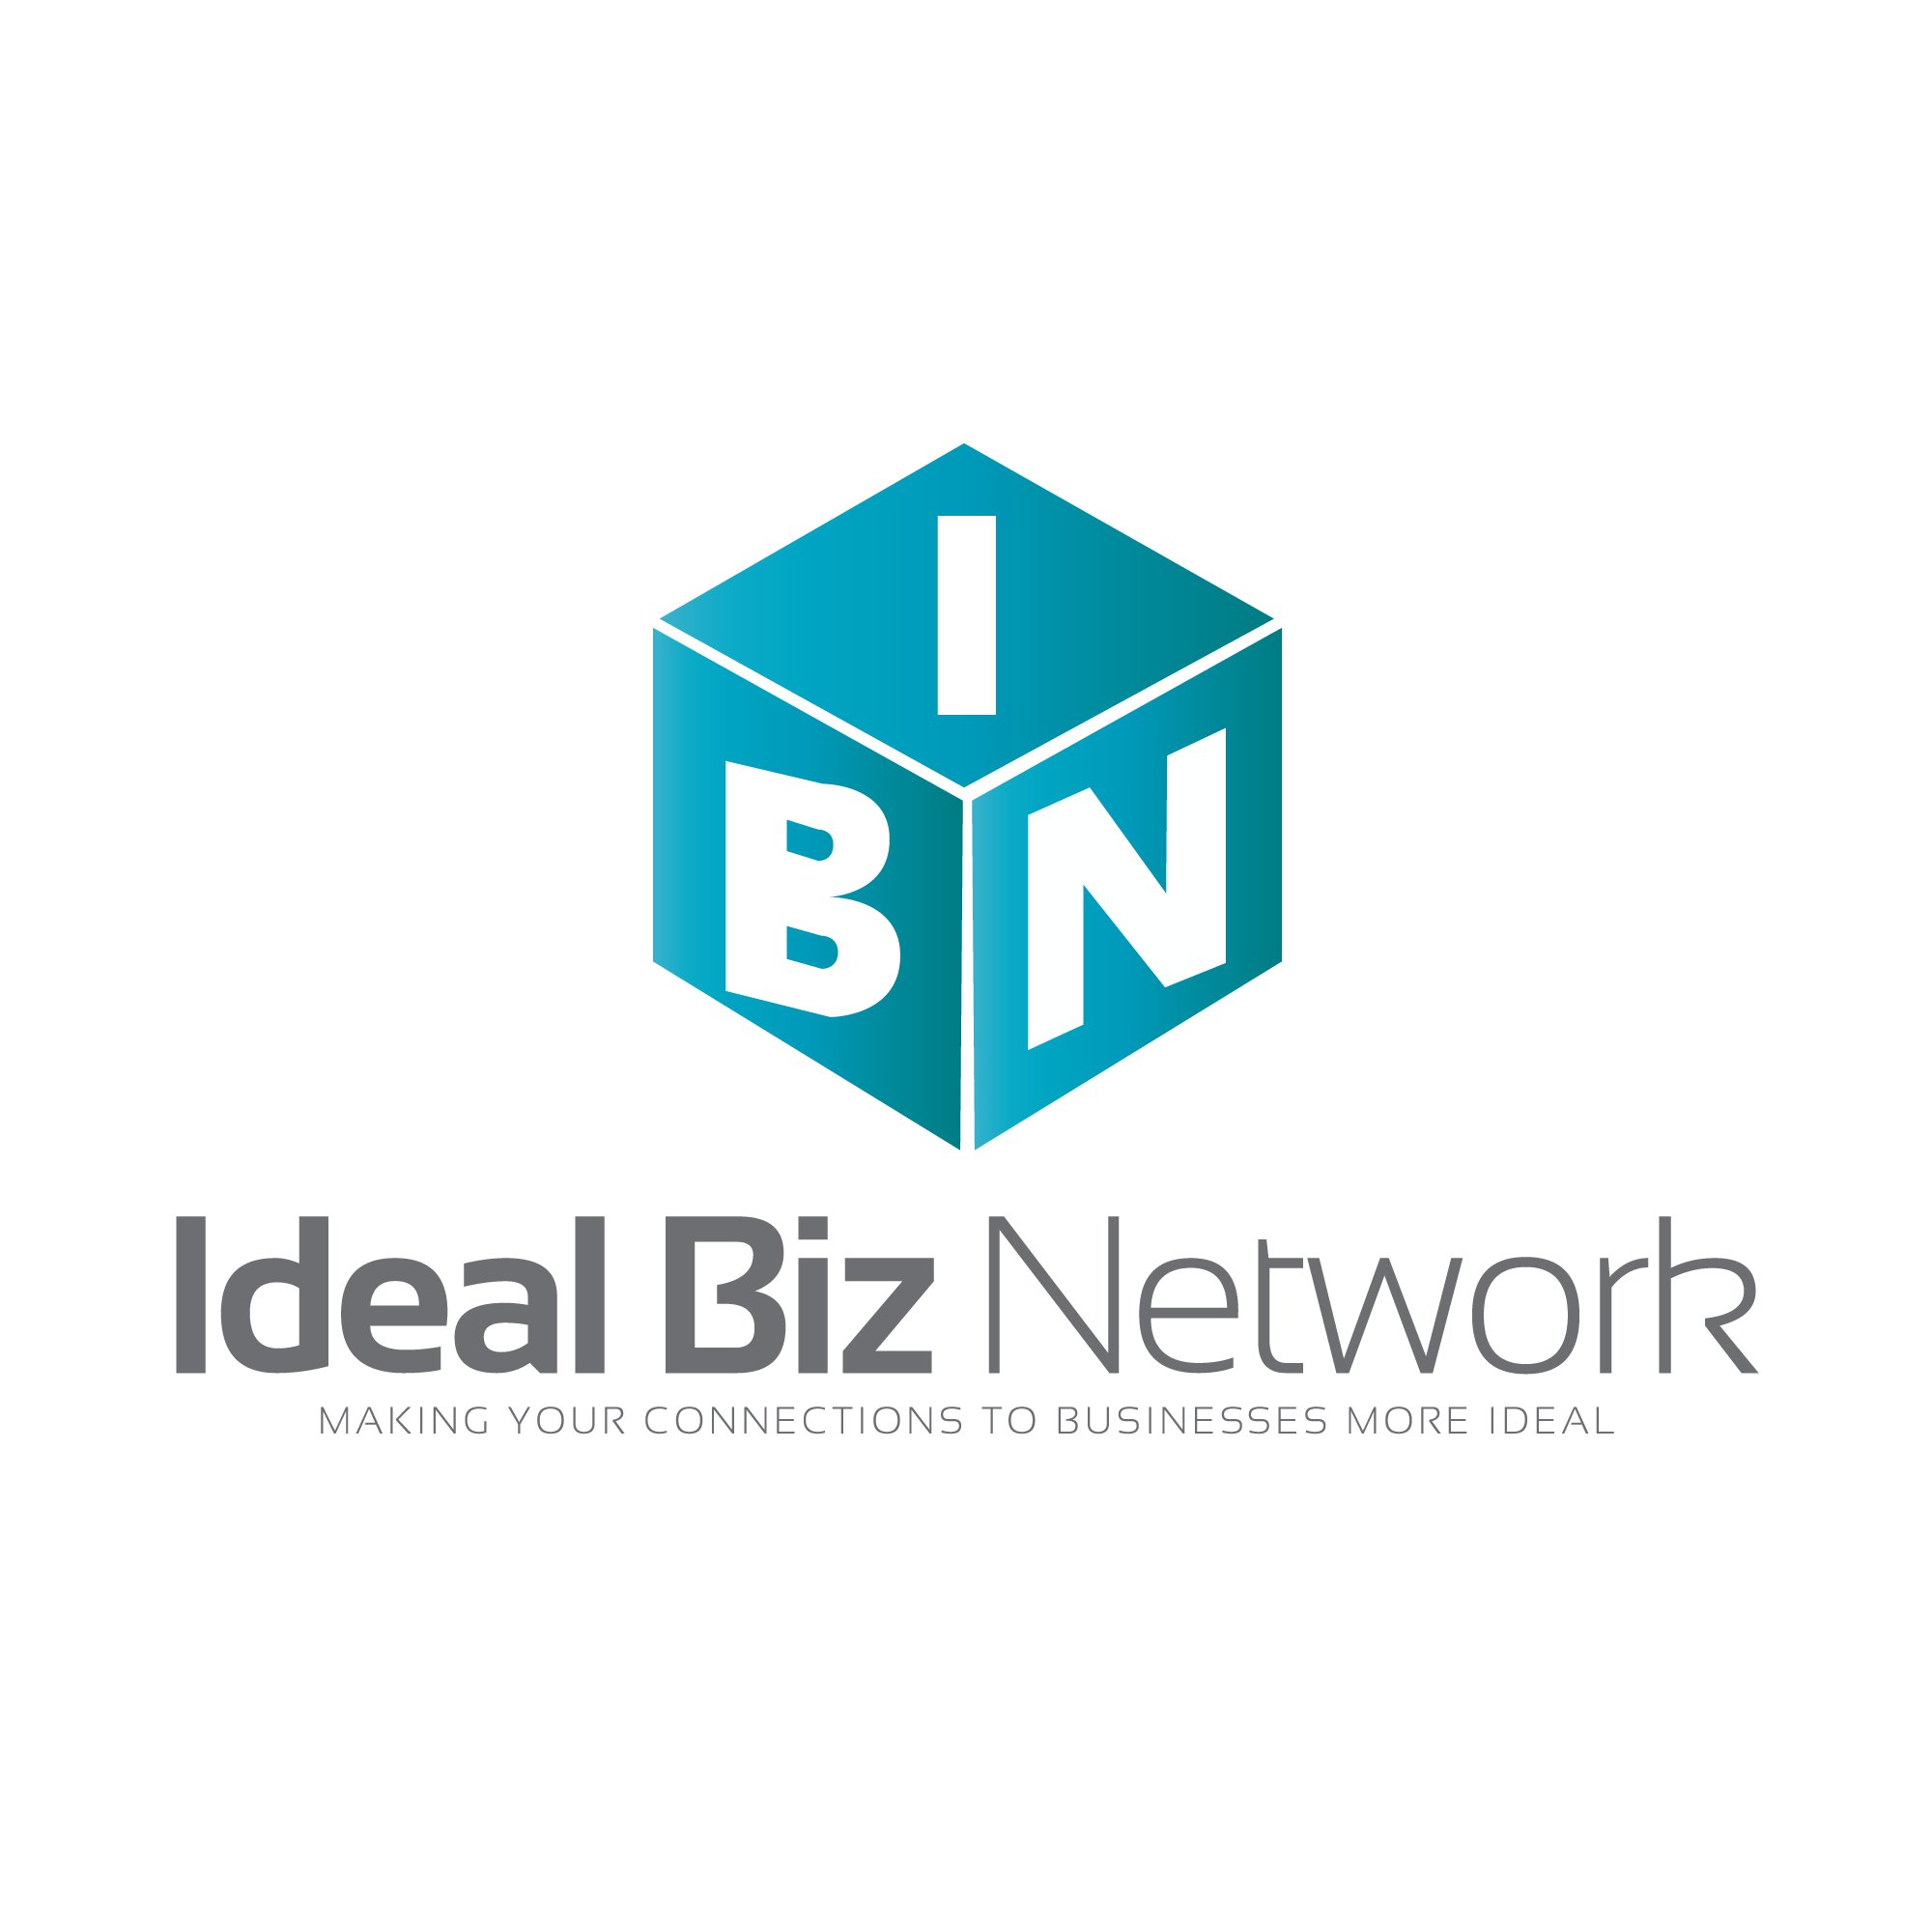 IdealBiz Network is a platform that will help #businesses build relationships and connect with #manufacturers and #distributors to save them time and money.